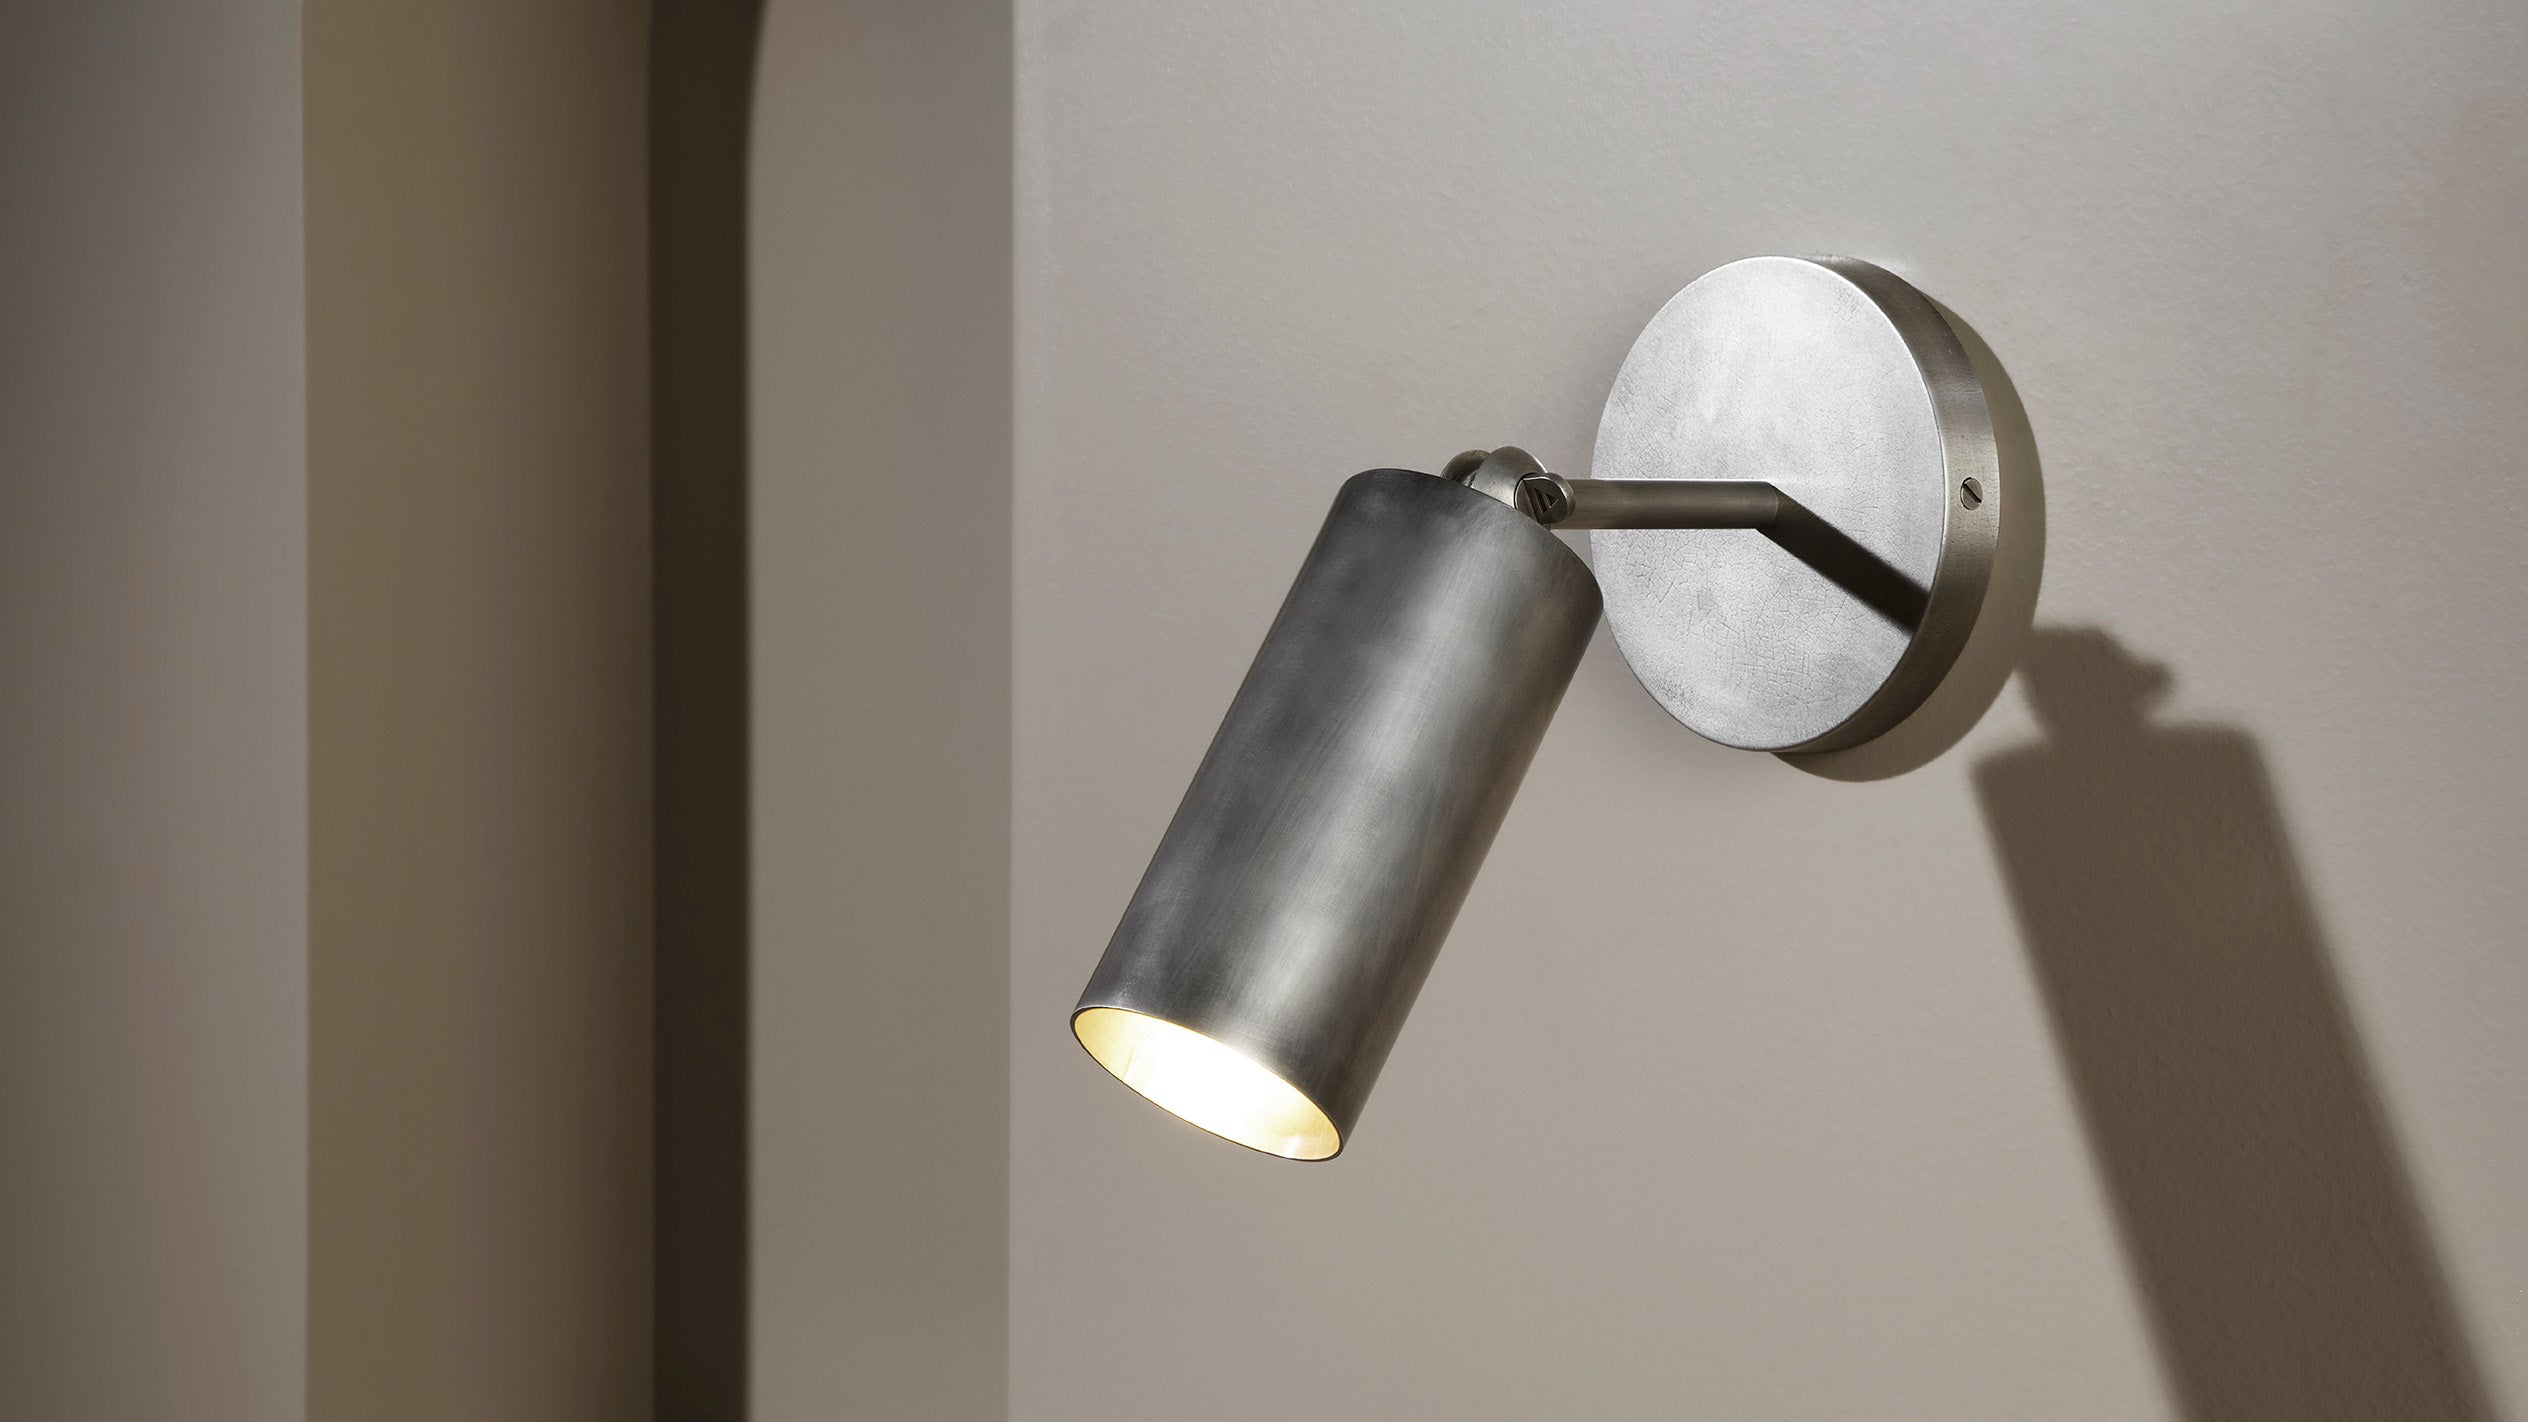 CYLINDER wall sconce in Tarnished Silver finish. 